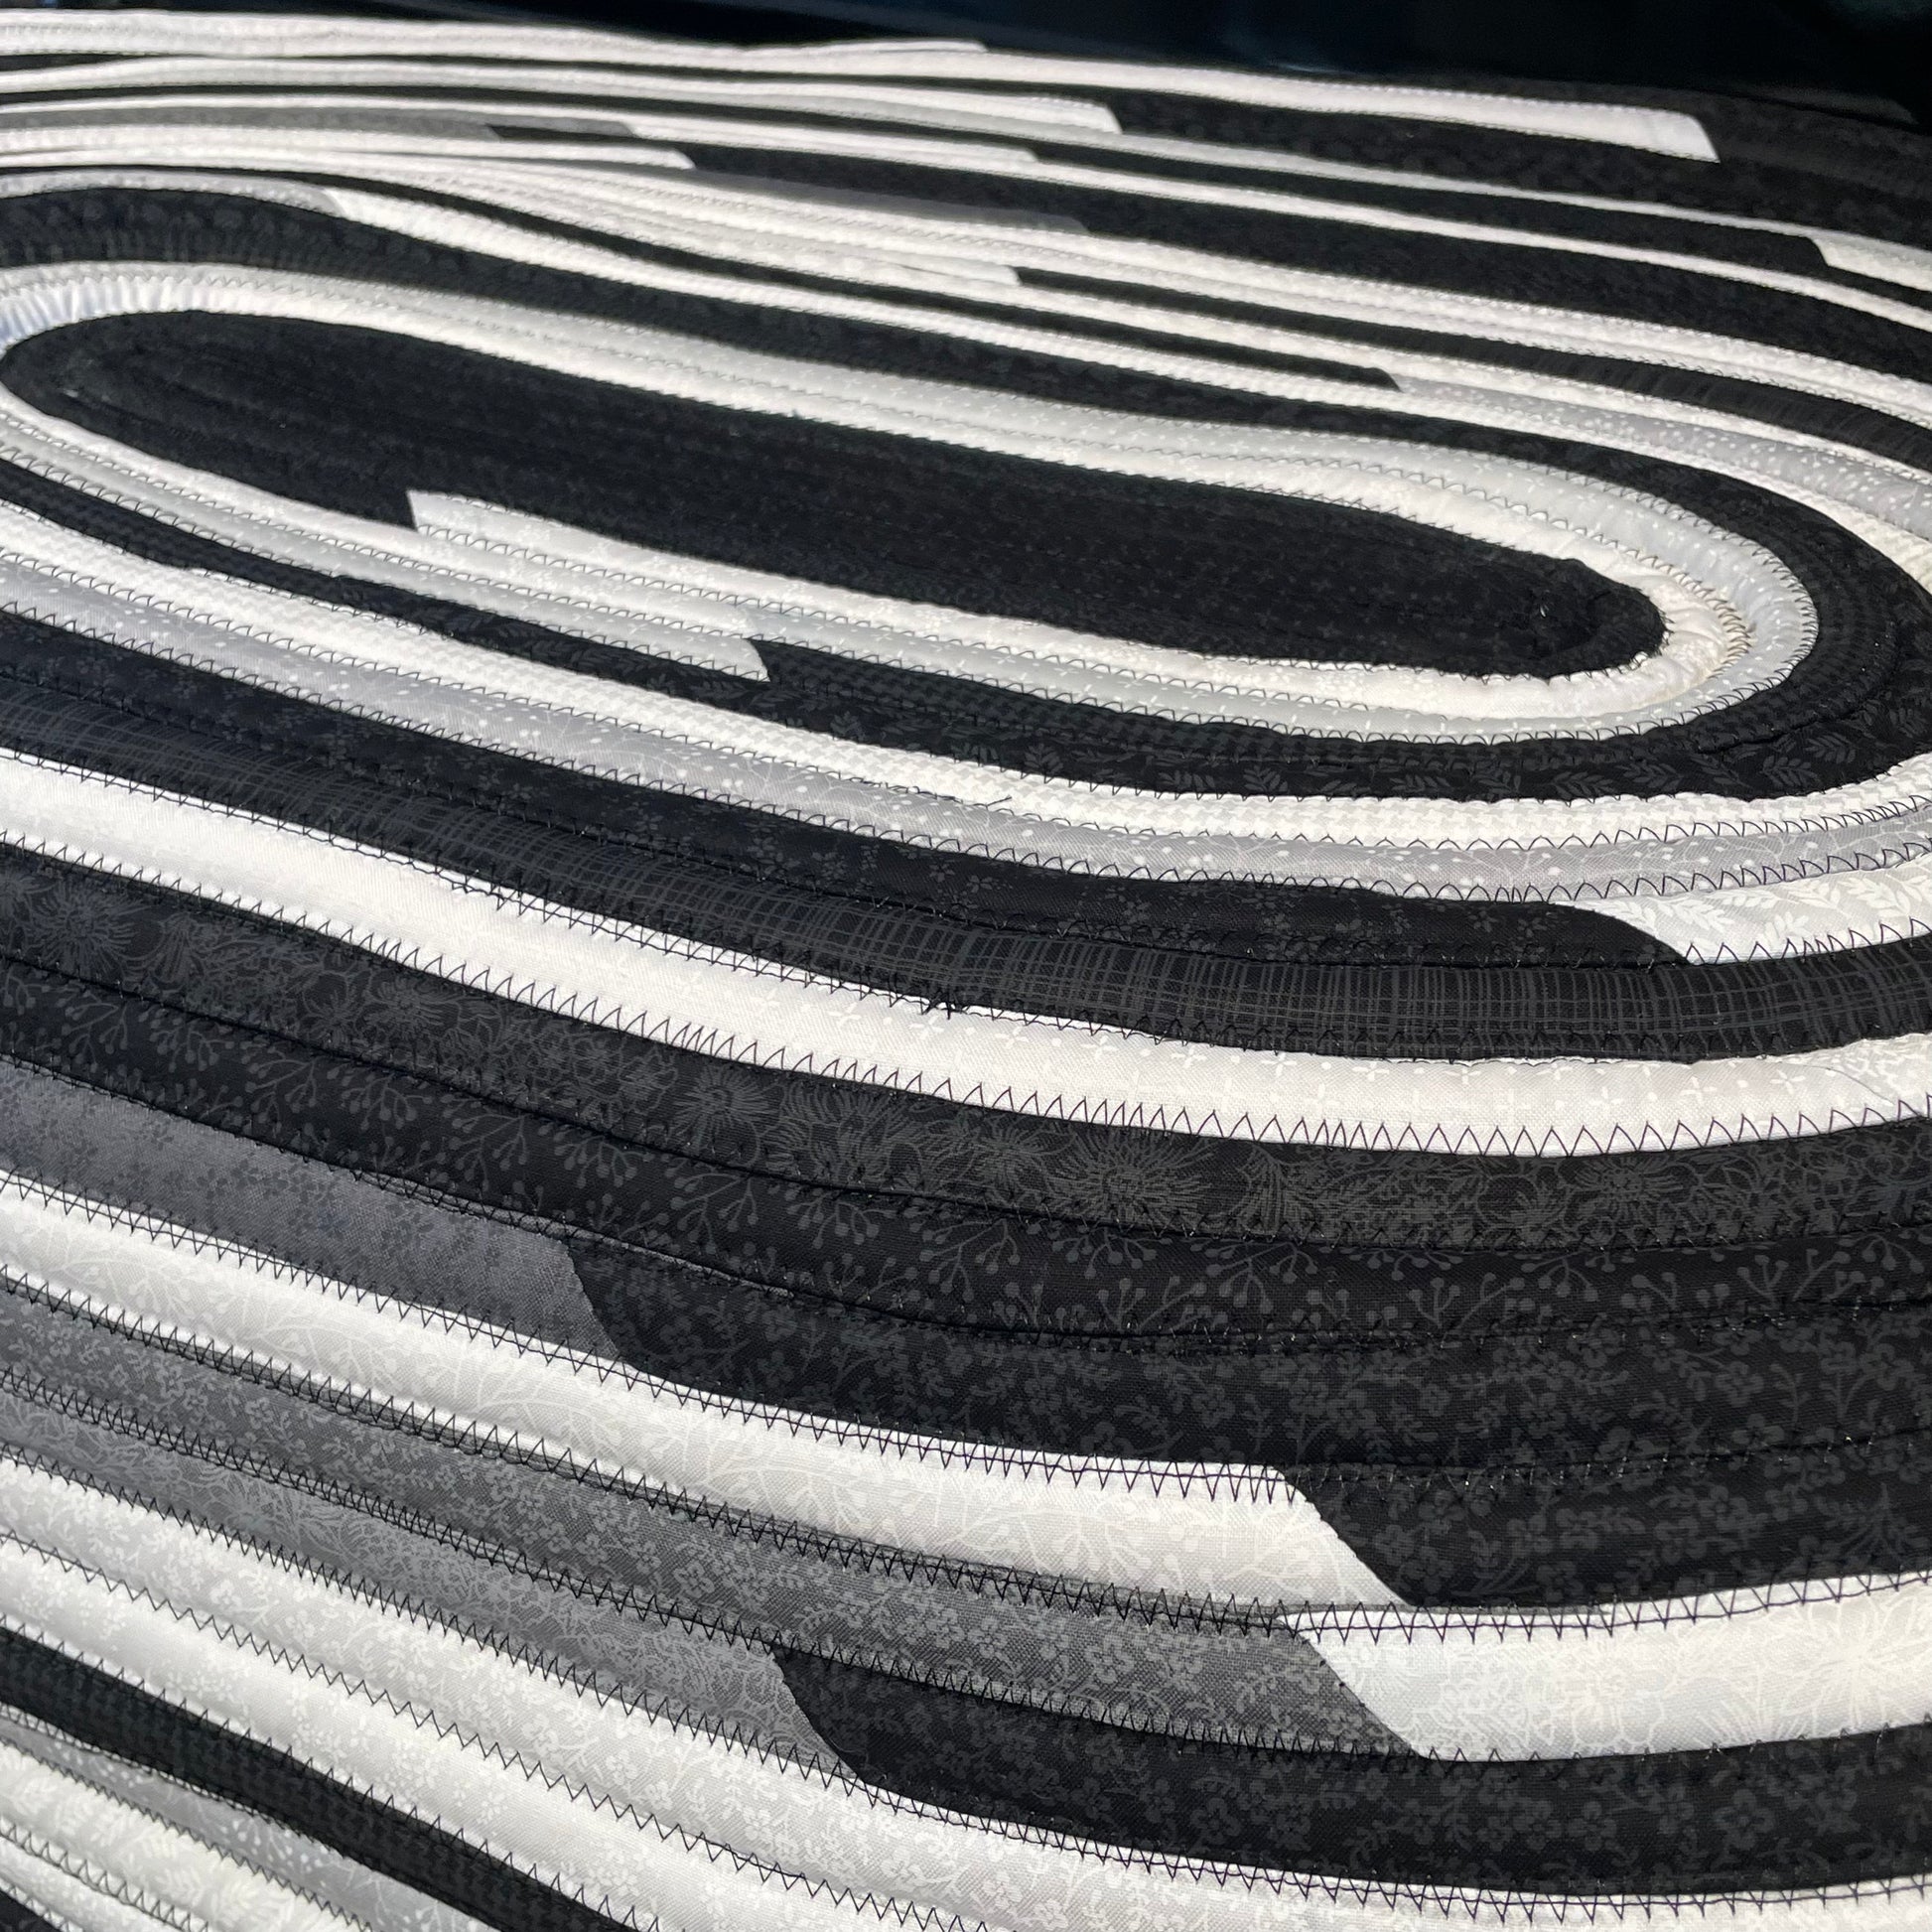 Handmade Kitchen Jelly Roll Rug. Featuring black, grey and white tones of quilting cotton. Washable and durable this rug will last for years. Handmade in Canada by Home Stitchery Decor